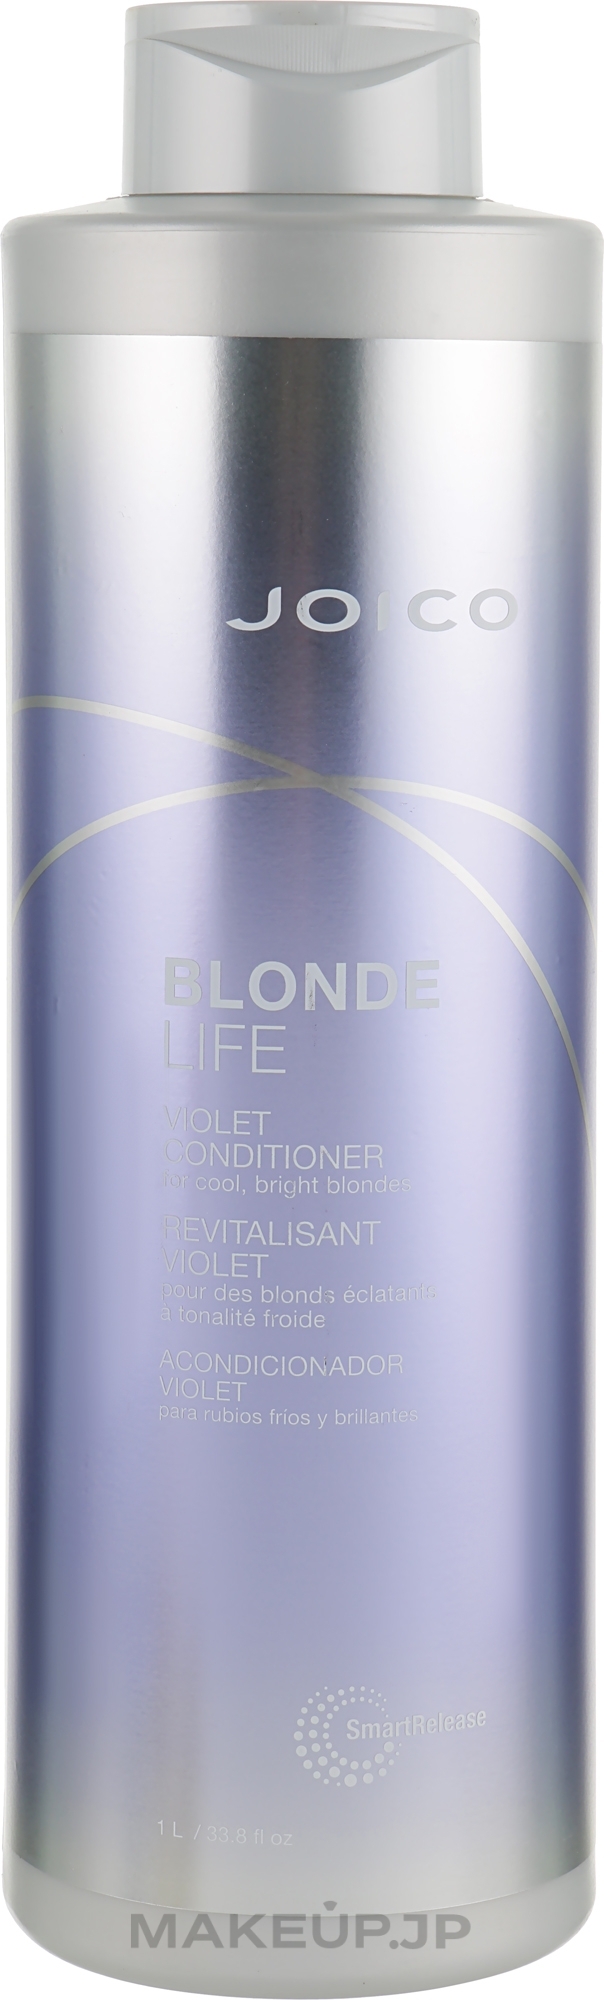 Violet Conditioner for Bright Blonde - Joico Blonde Life Violet Conditioner — photo 1000 ml